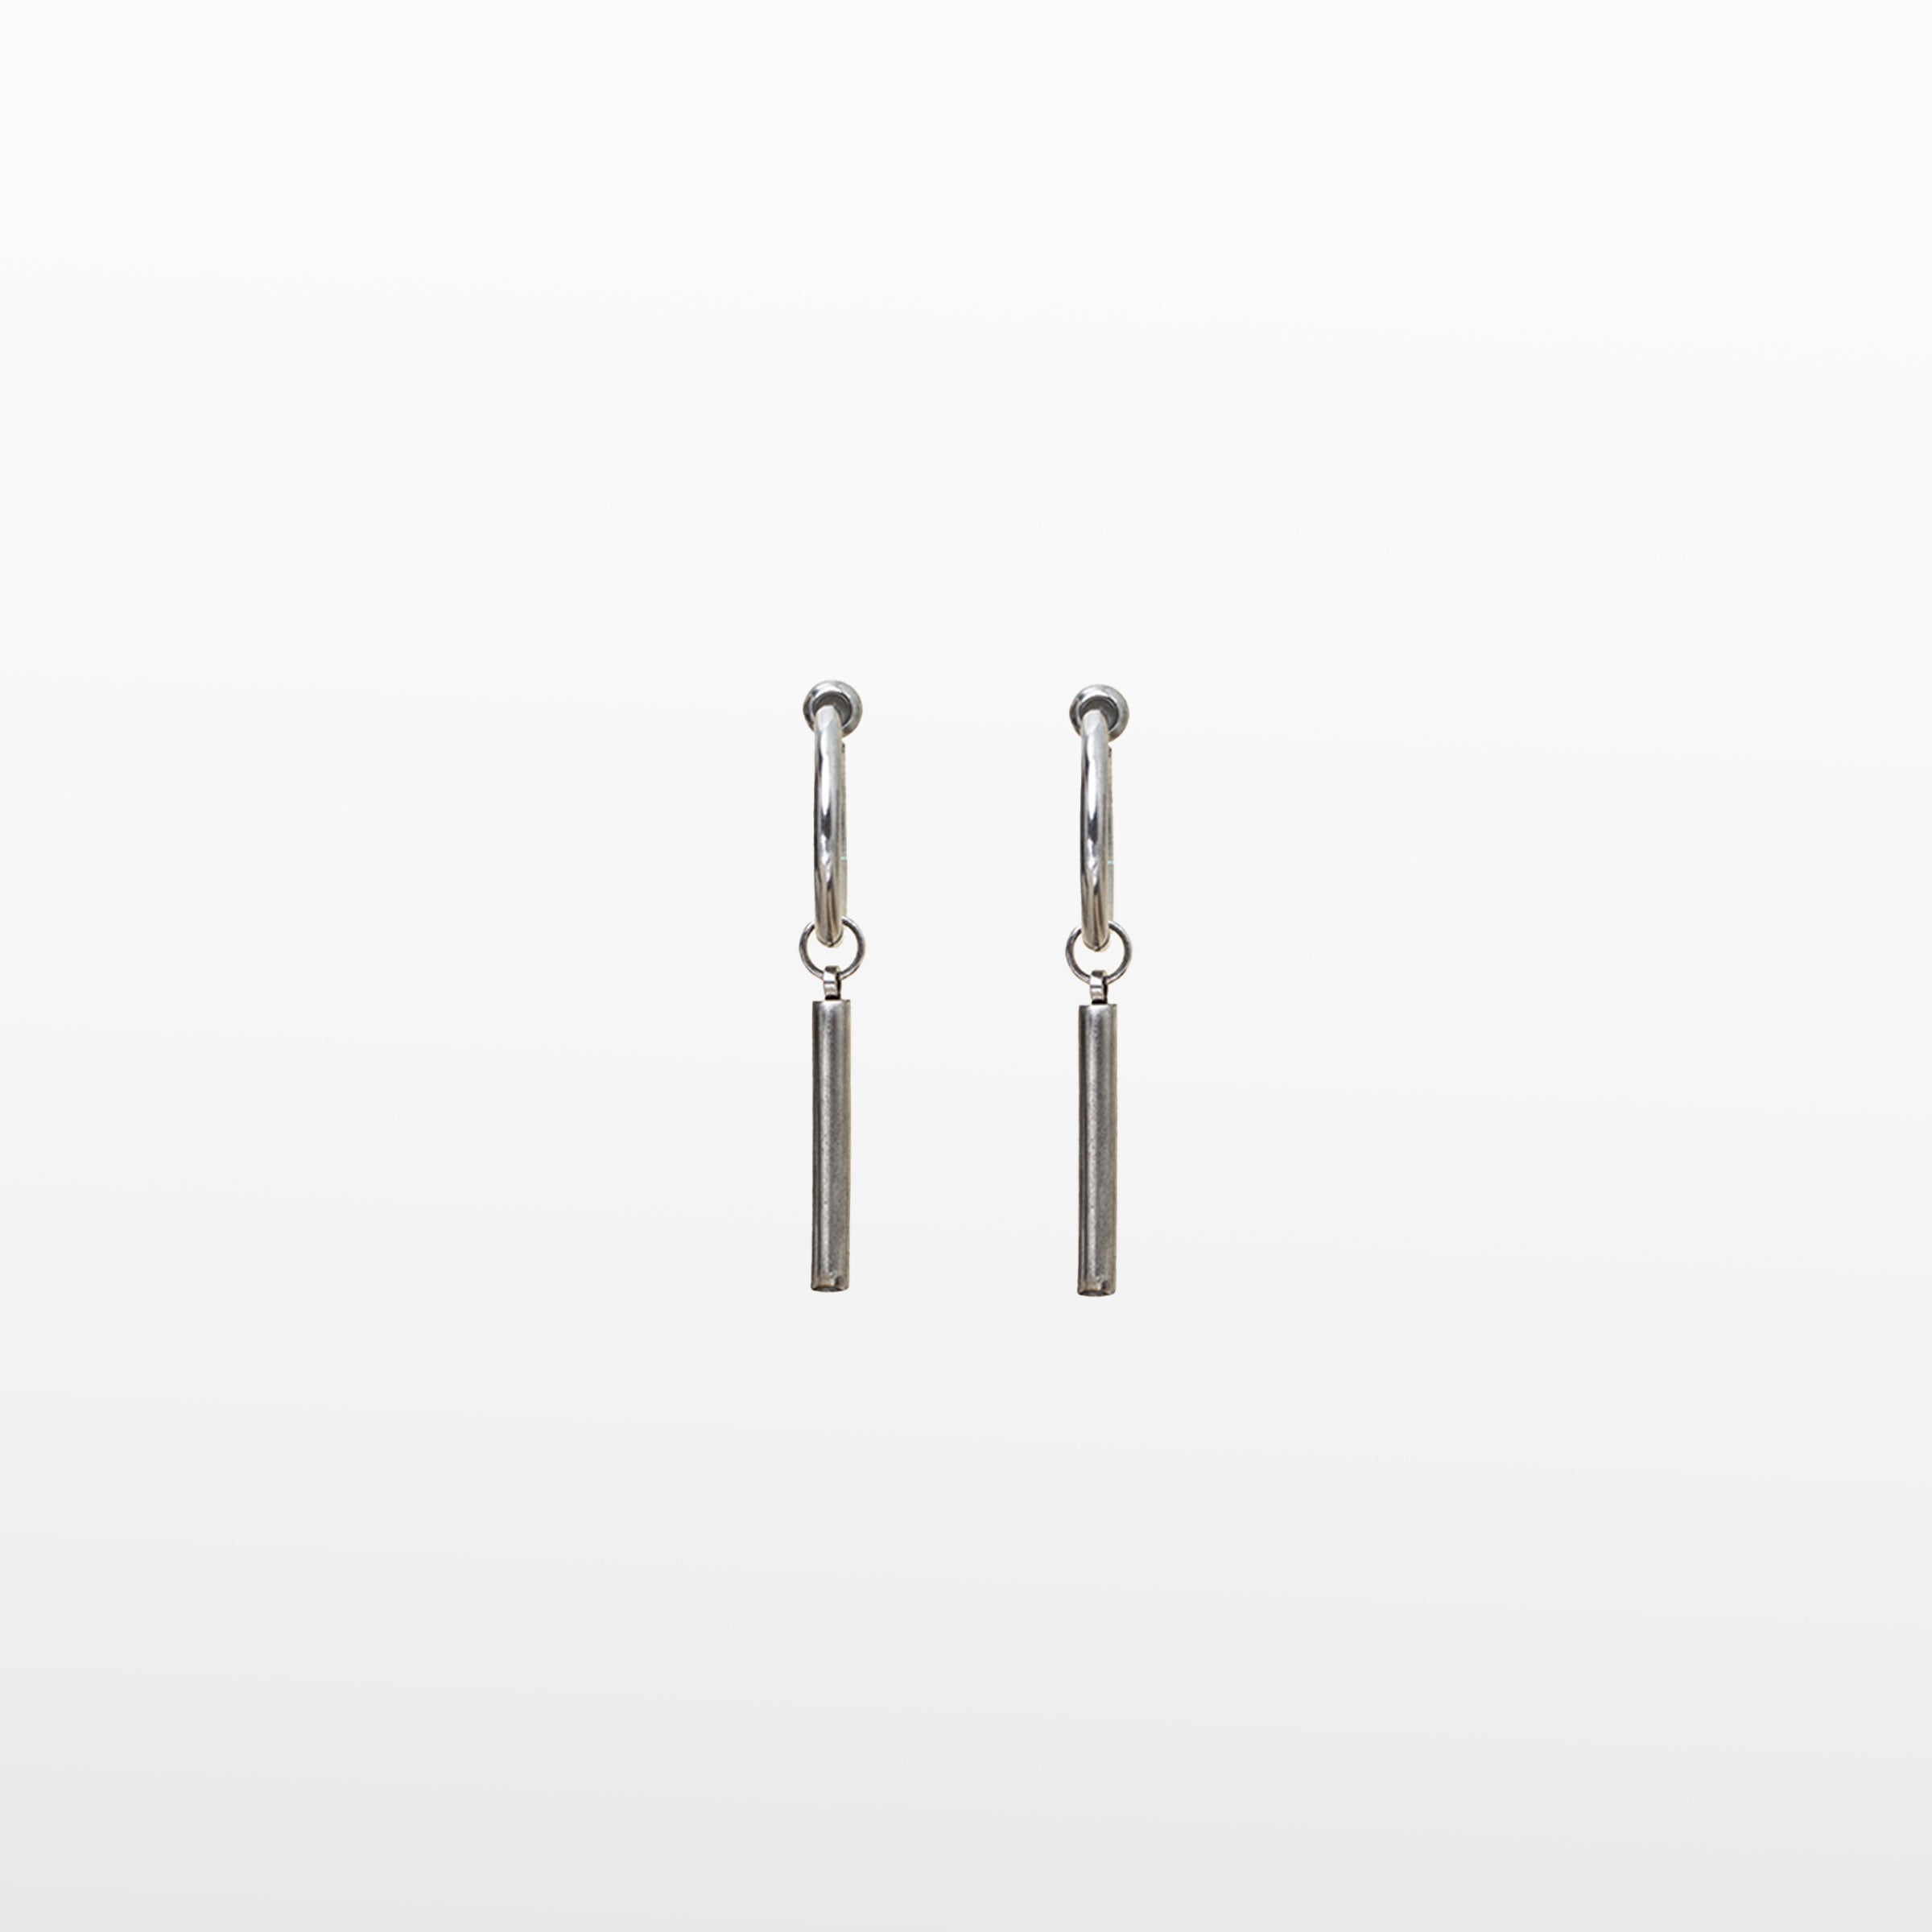 Image of the Bar Clip-On Earrings boast a sliding spring closure ideal for those with small to thin ear lobes. These earrings are comfortable to wear for an average of 2-4 hours and offer a very secure hold. Additionally, the closure mechanism adjusts to ear thickness for a perfect fit every time. Crafted from stainless steel, each order includes one pair.